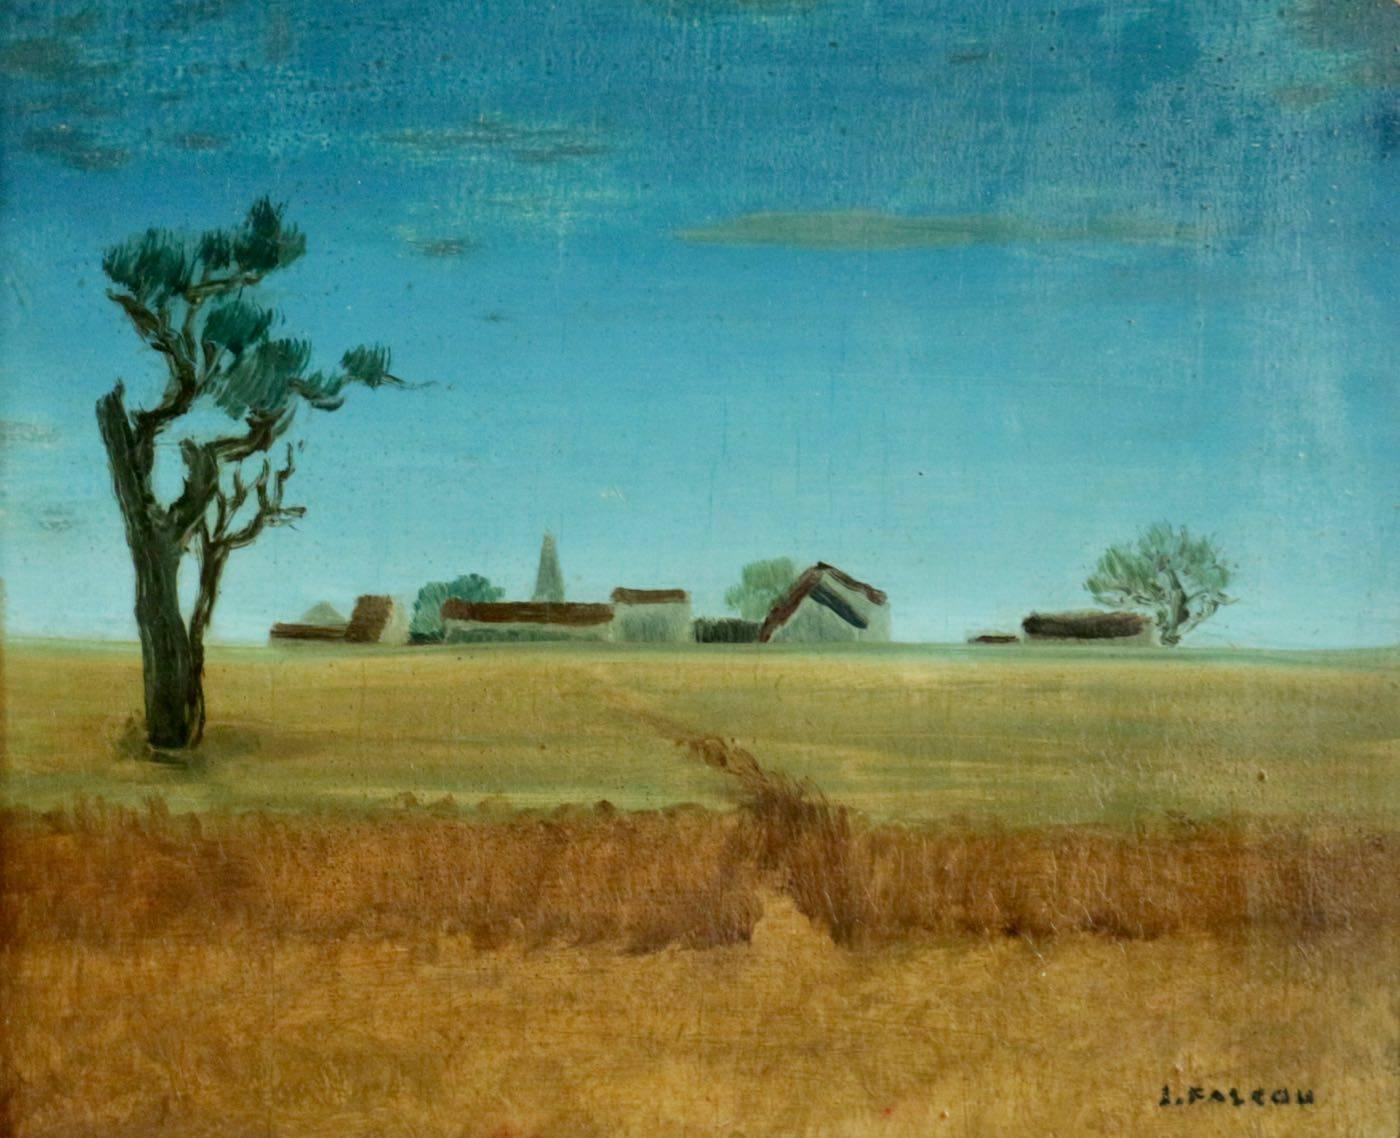 Painting by J. Faseau of the French countryside. Dating 1950-1950.
Measures: Toile: L 23cm, H 19cm
Cadre: L 42cm, H 37cm.